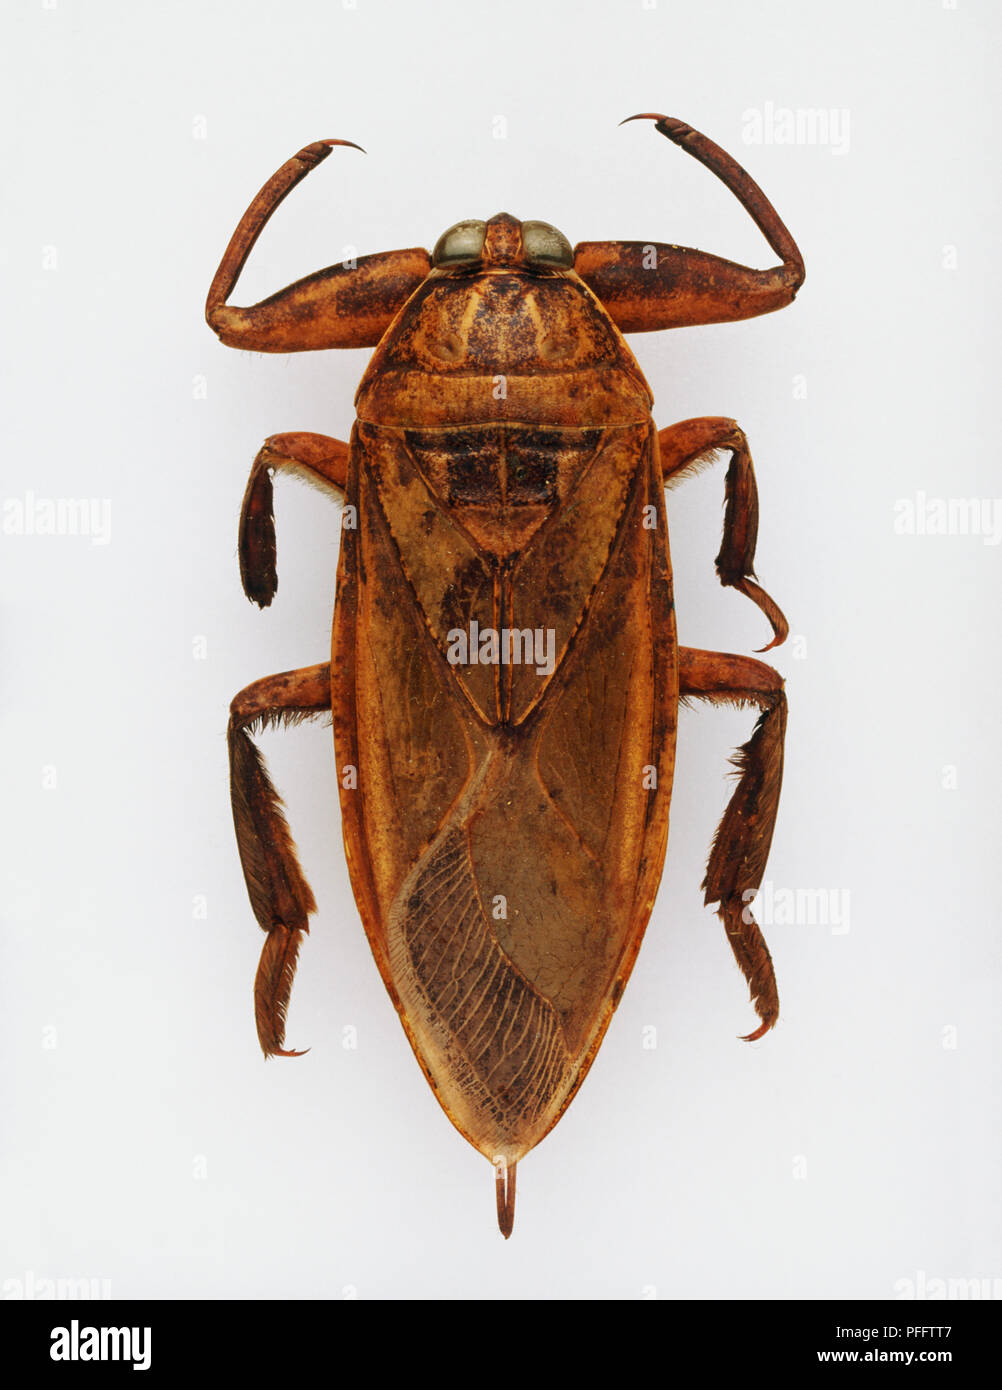 Giant water bug, top view. A reddish brown bug with specialized front legs. Stock Photo